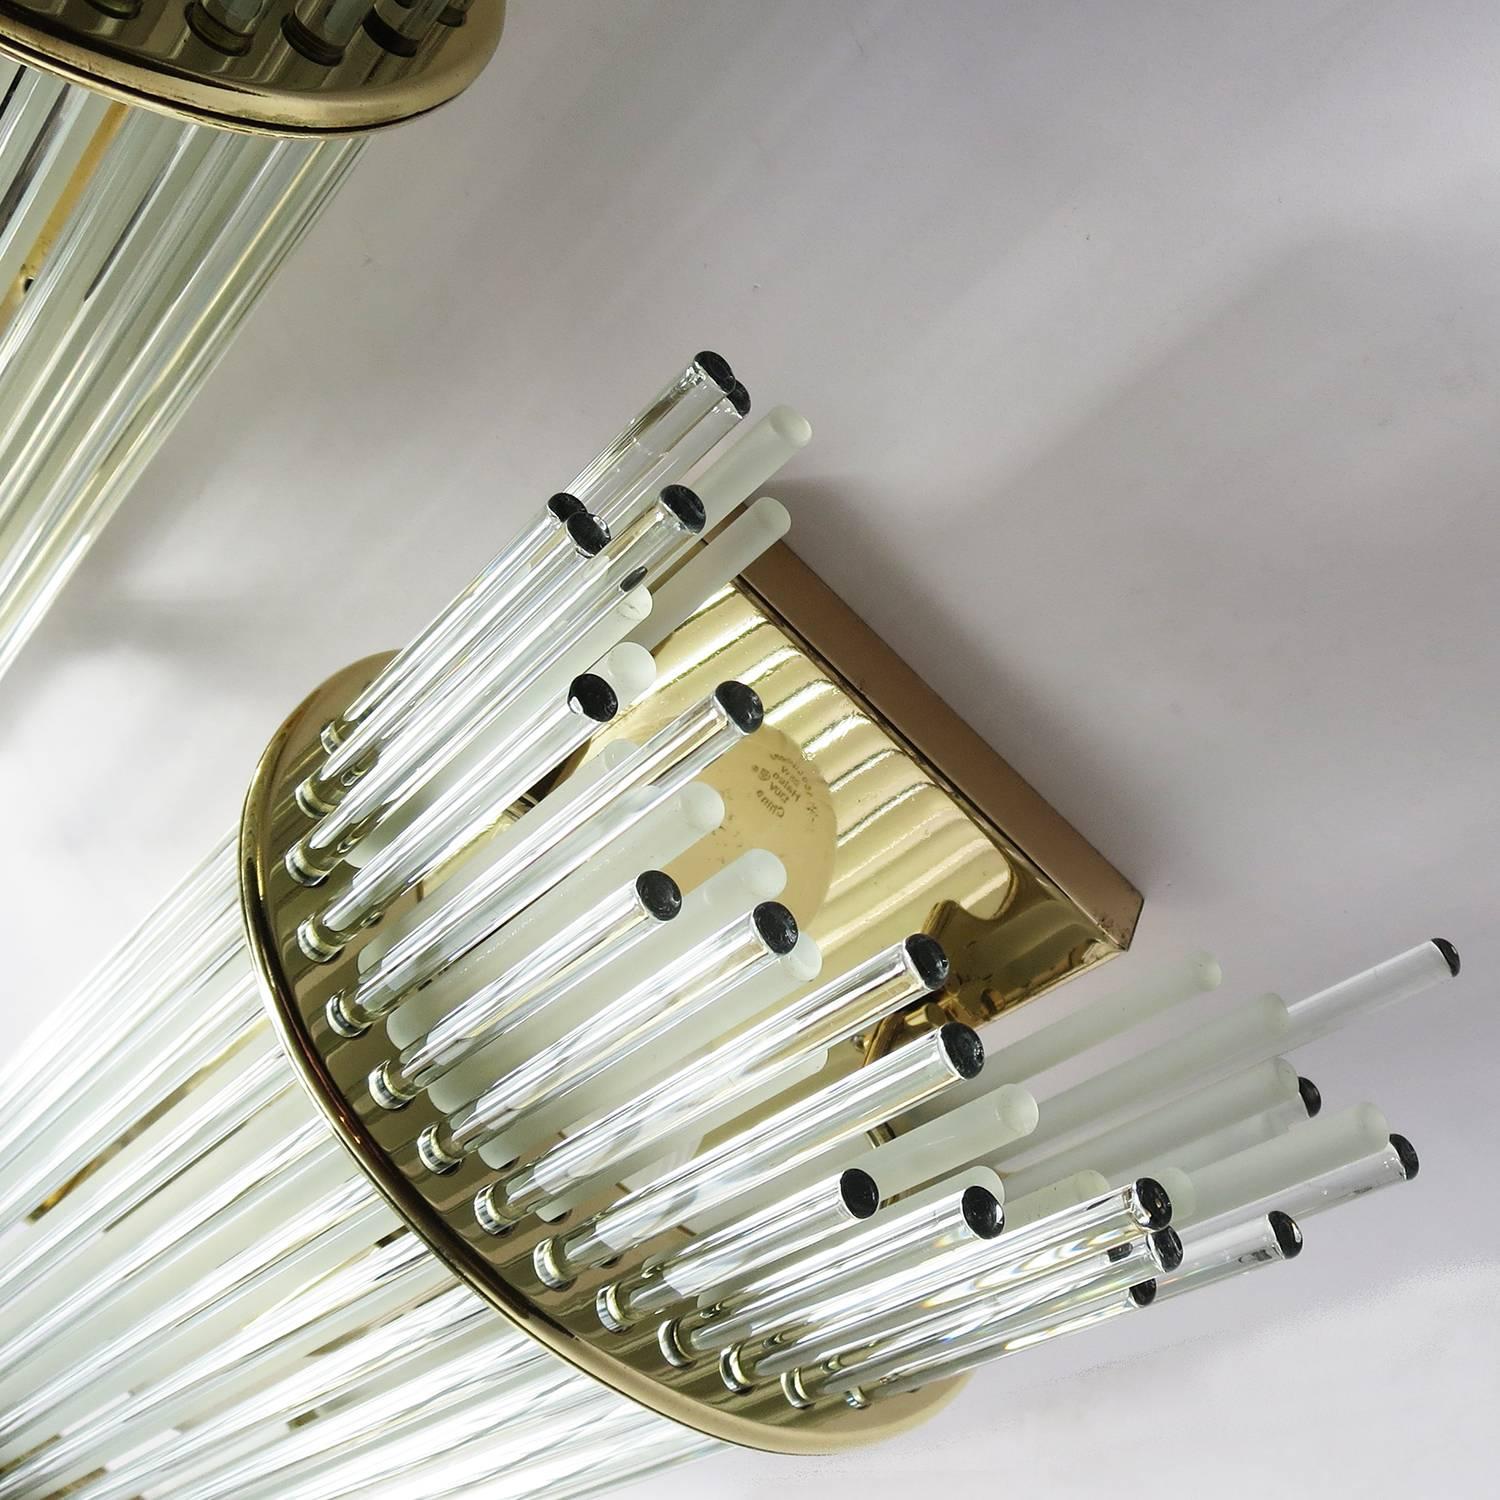 A very unique design utilizing thin glass rods as shades. An inner row of frosted rods helps obscure the bulbs, while the outer row of glossy rods add the sparkle. The fixtures have been re-plated in brass, and display very well. There are two